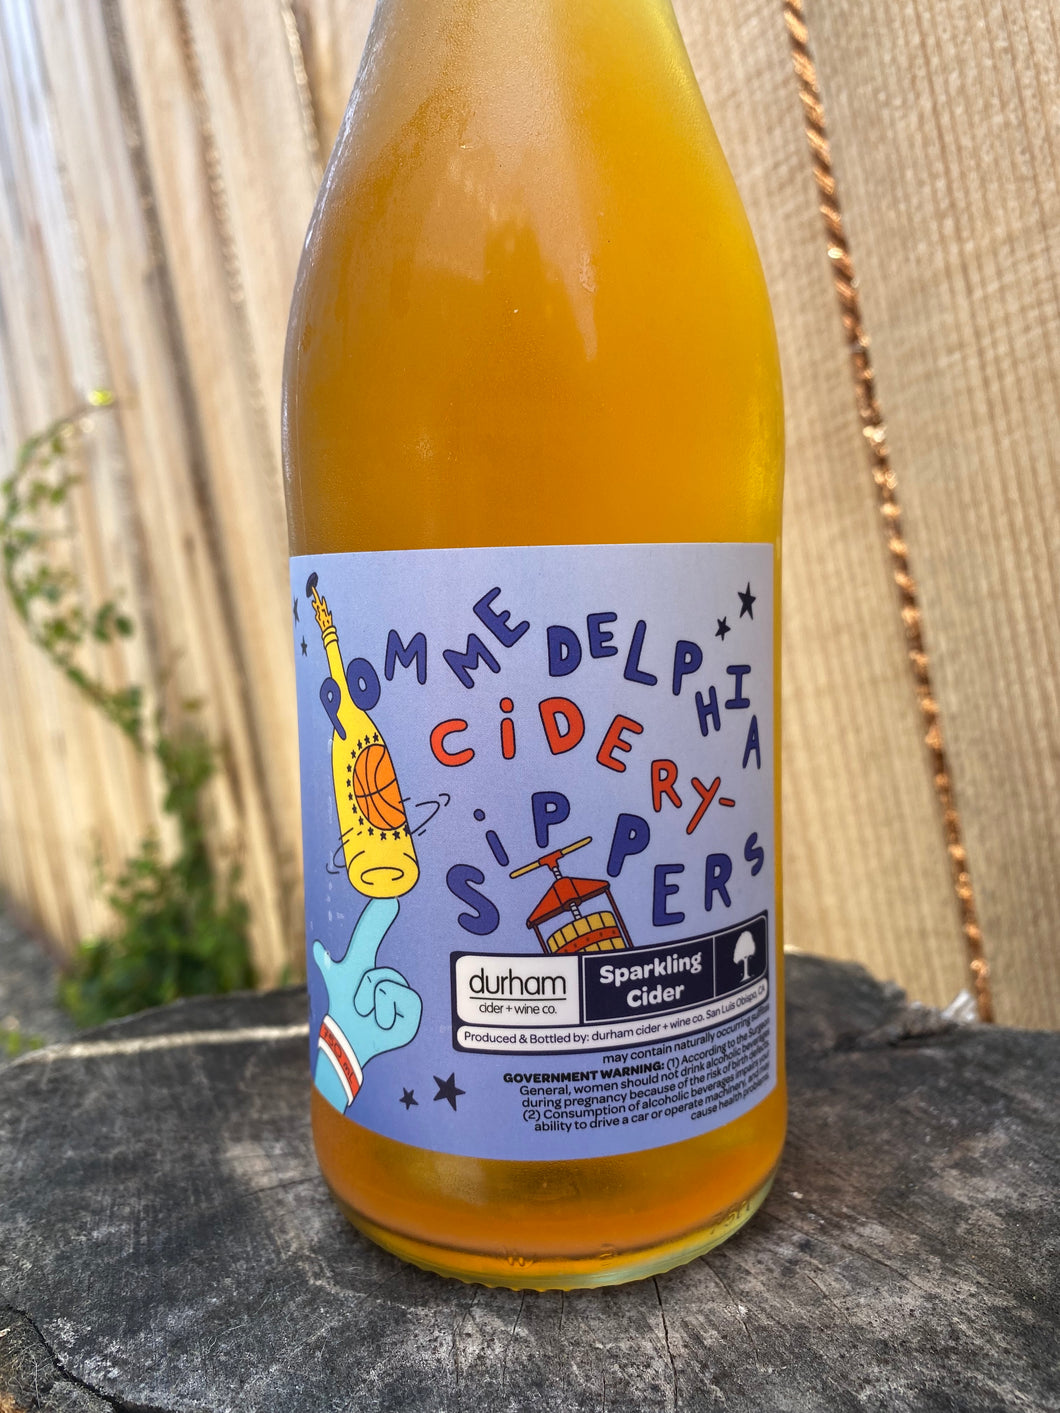 Pommedelphia Cidery Sippers (apples)